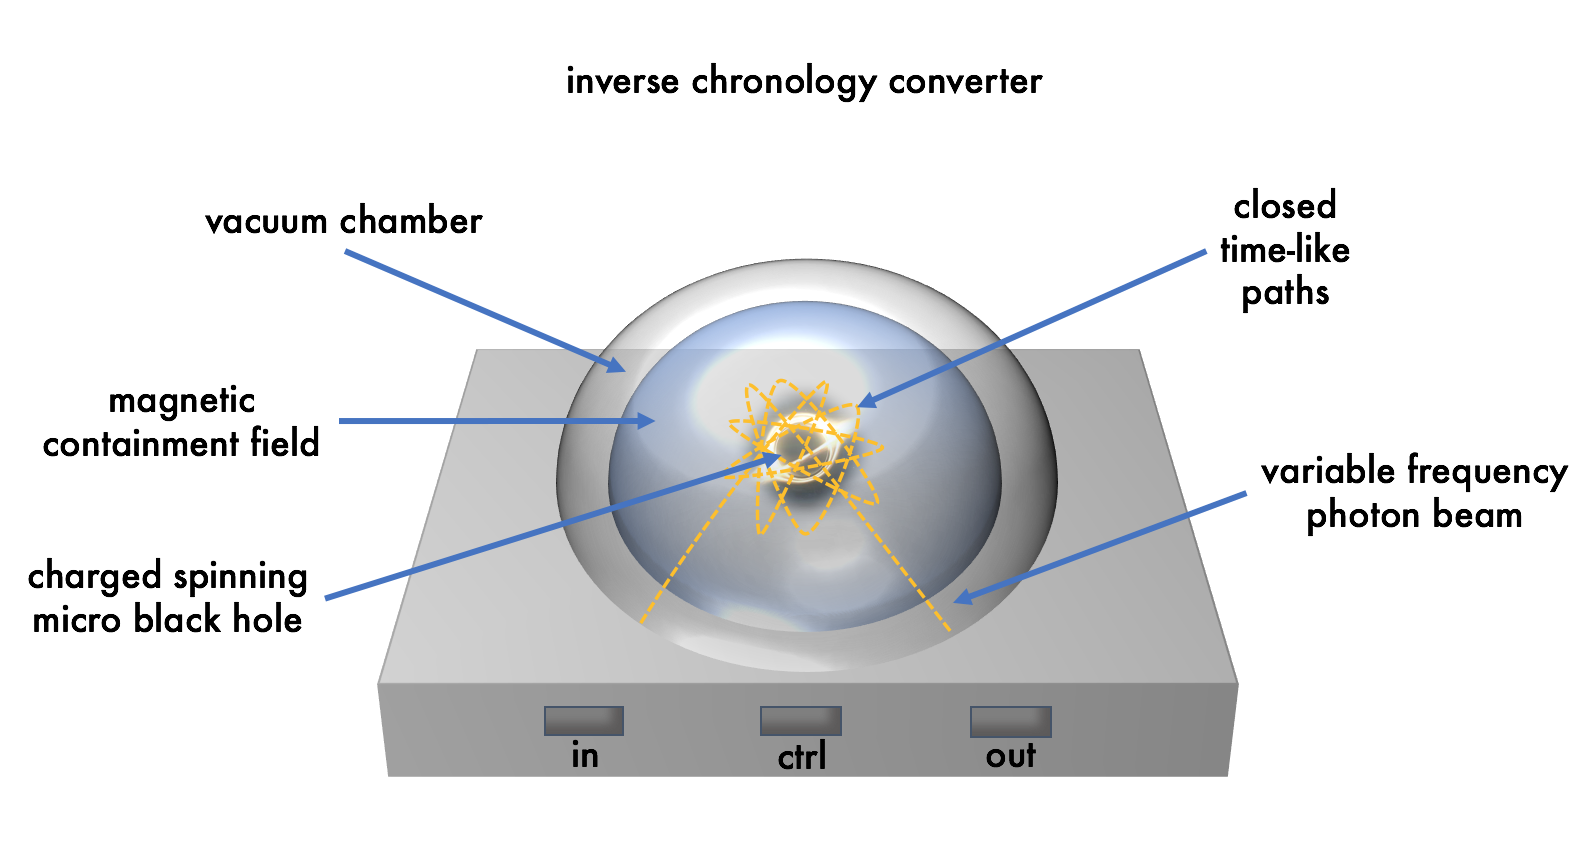 Inverse Chronology Converter Enables Pre-Time Data Integration and Analytics on Data Before It Is Created